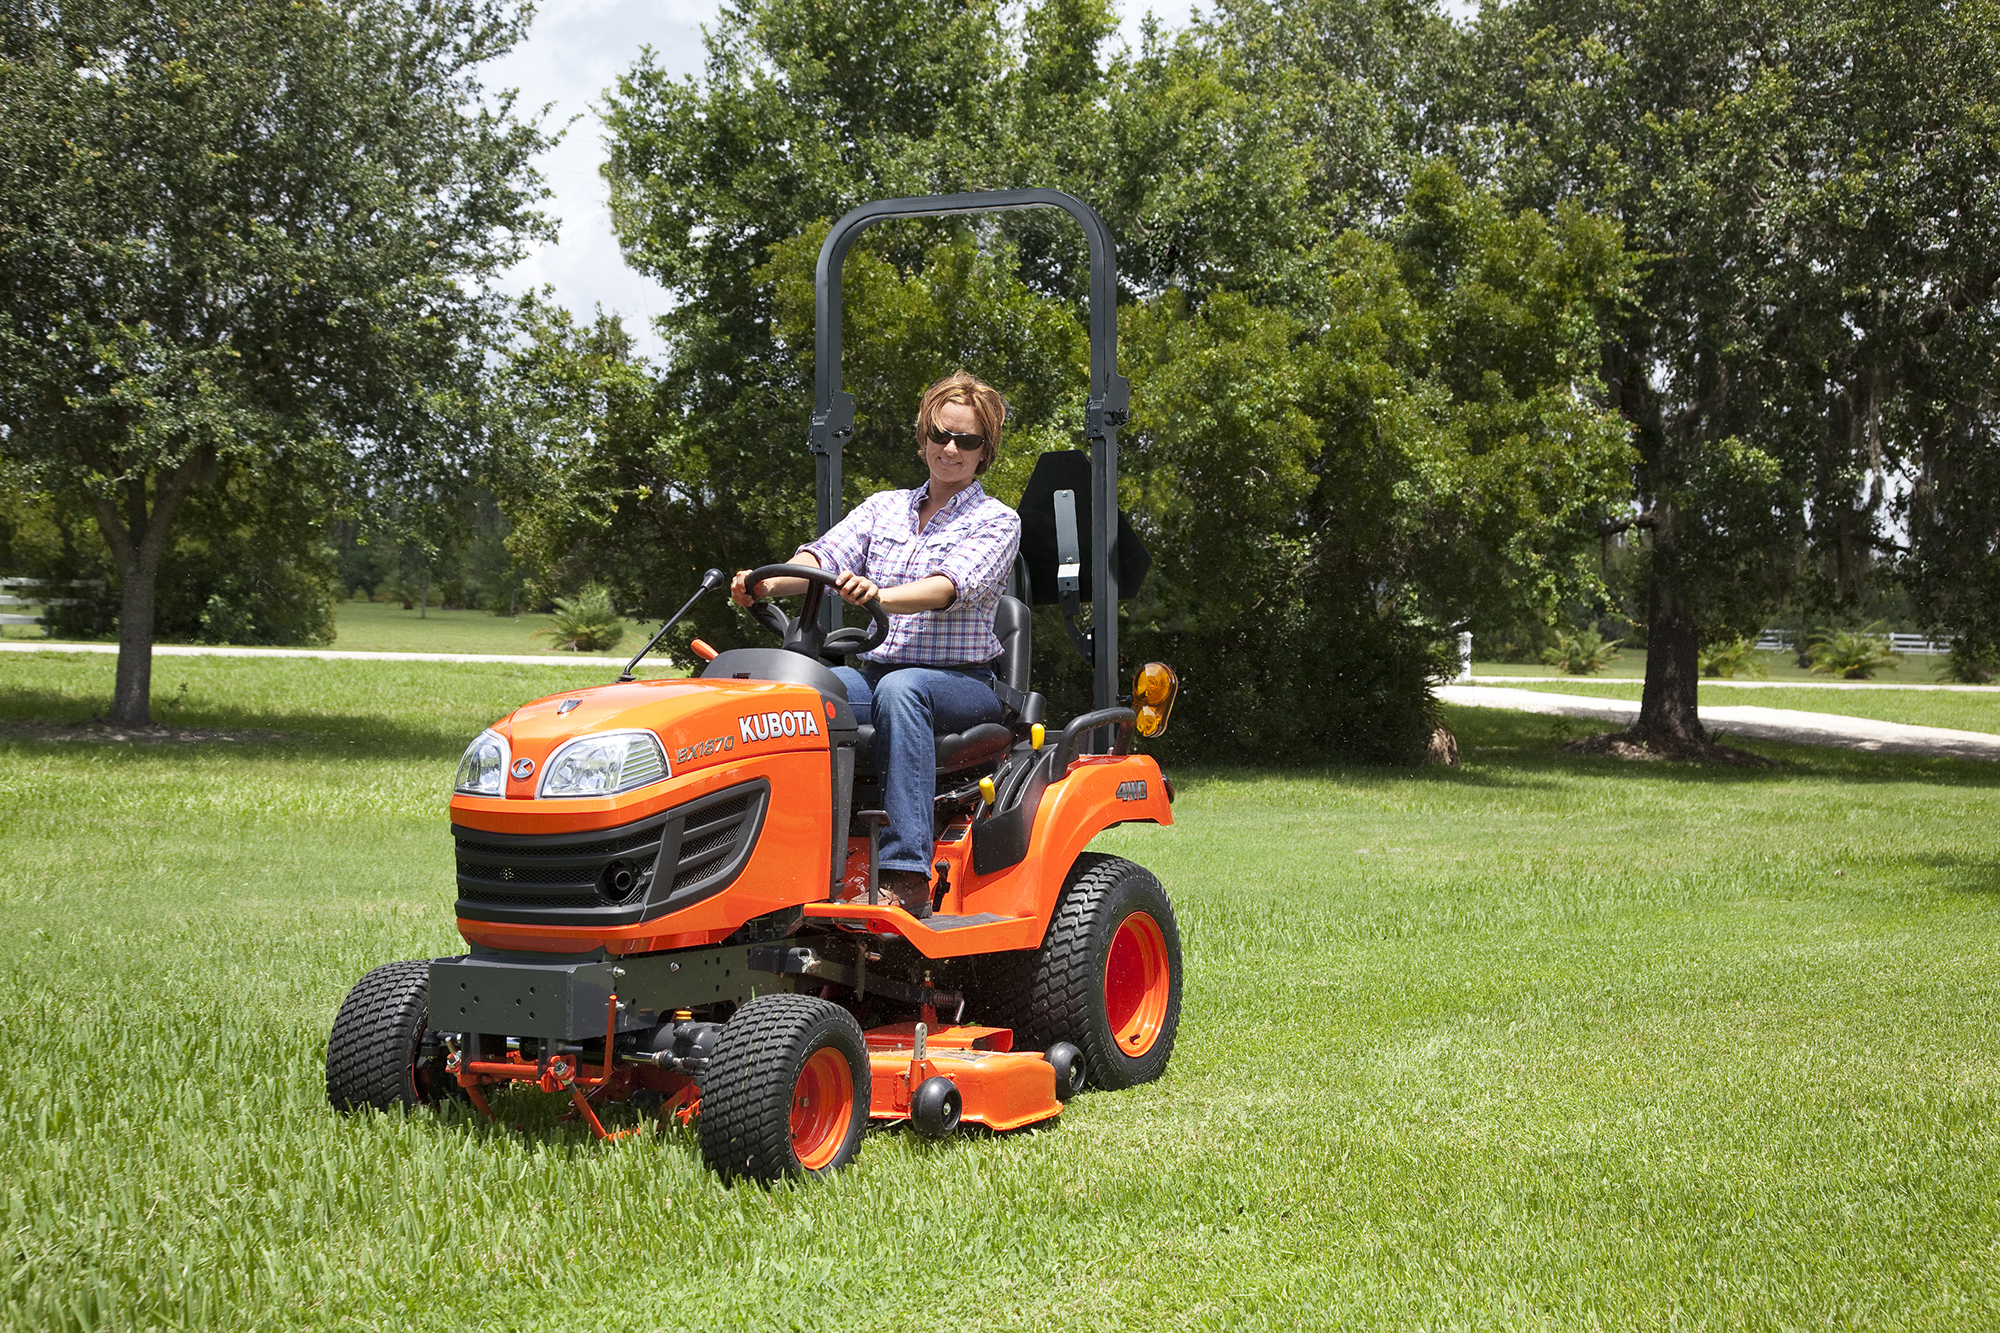 Kubota BX1870-1 Diesel Tractor in the Baltimore and Surrounding Areas